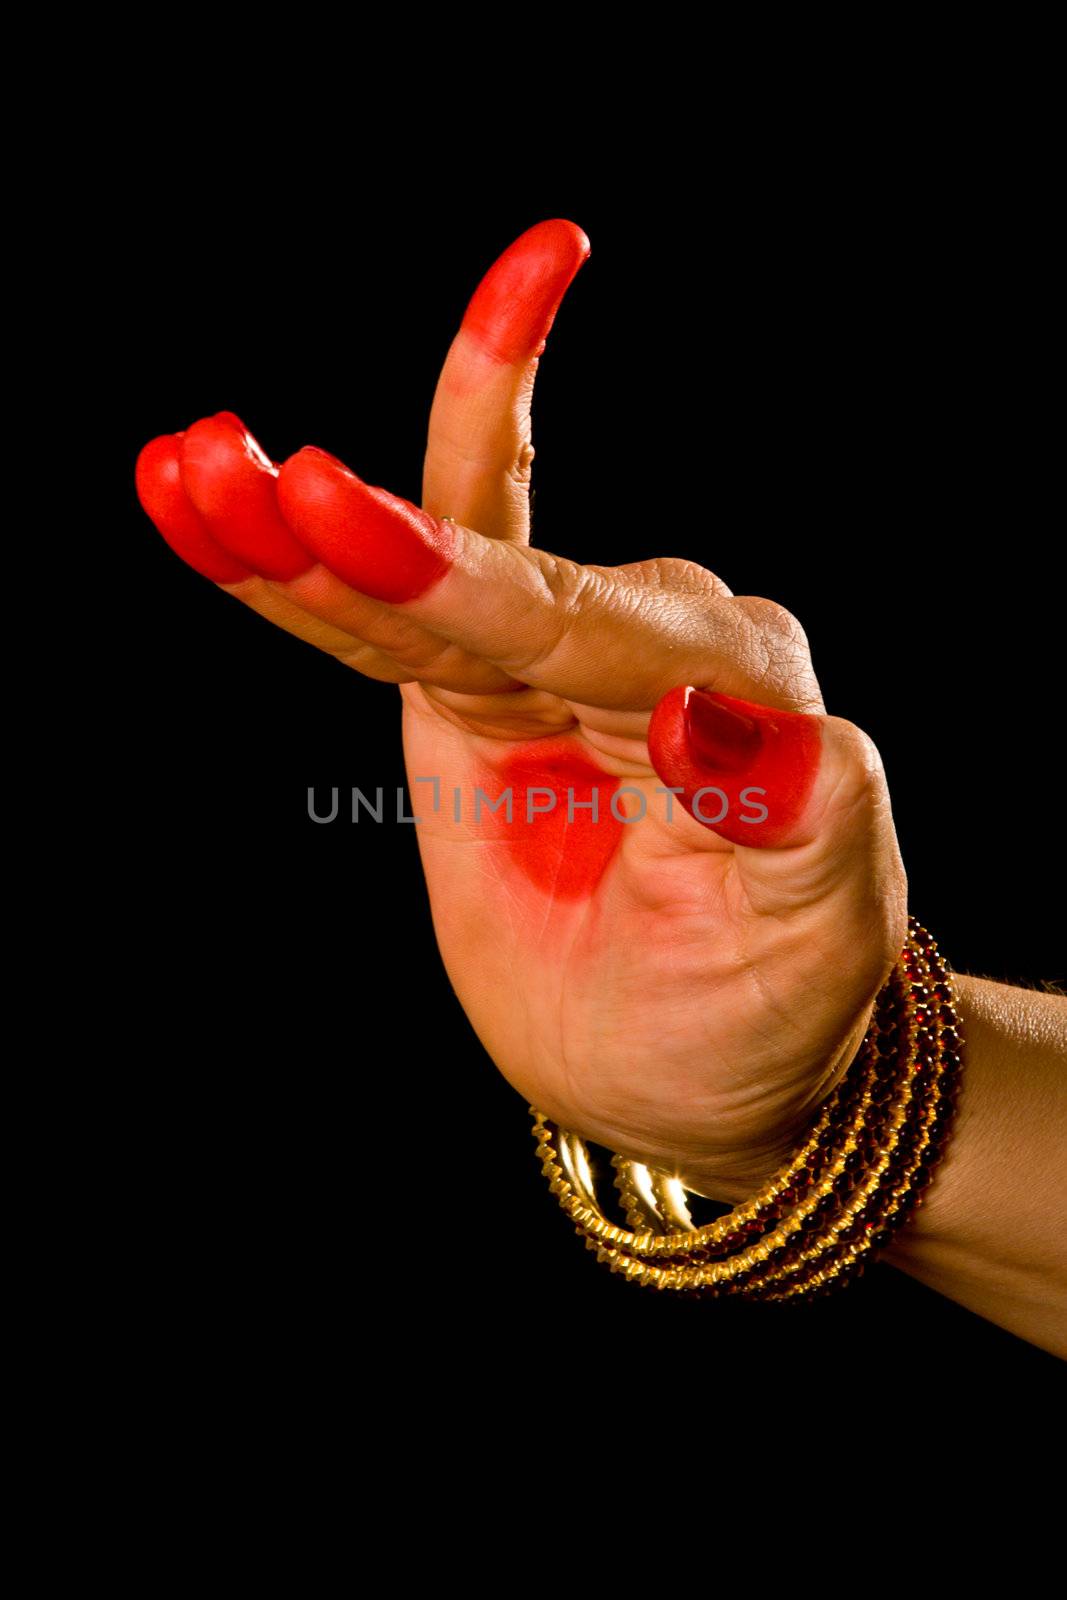 Woman hand showing Hamsapaksha hasta (hand gesture, also called mudra) (meaning "number 6" or "Bridge") of indian classic dance Bharata Natyam. Also used in other indian classical dances Kuchipudi and Odissi.